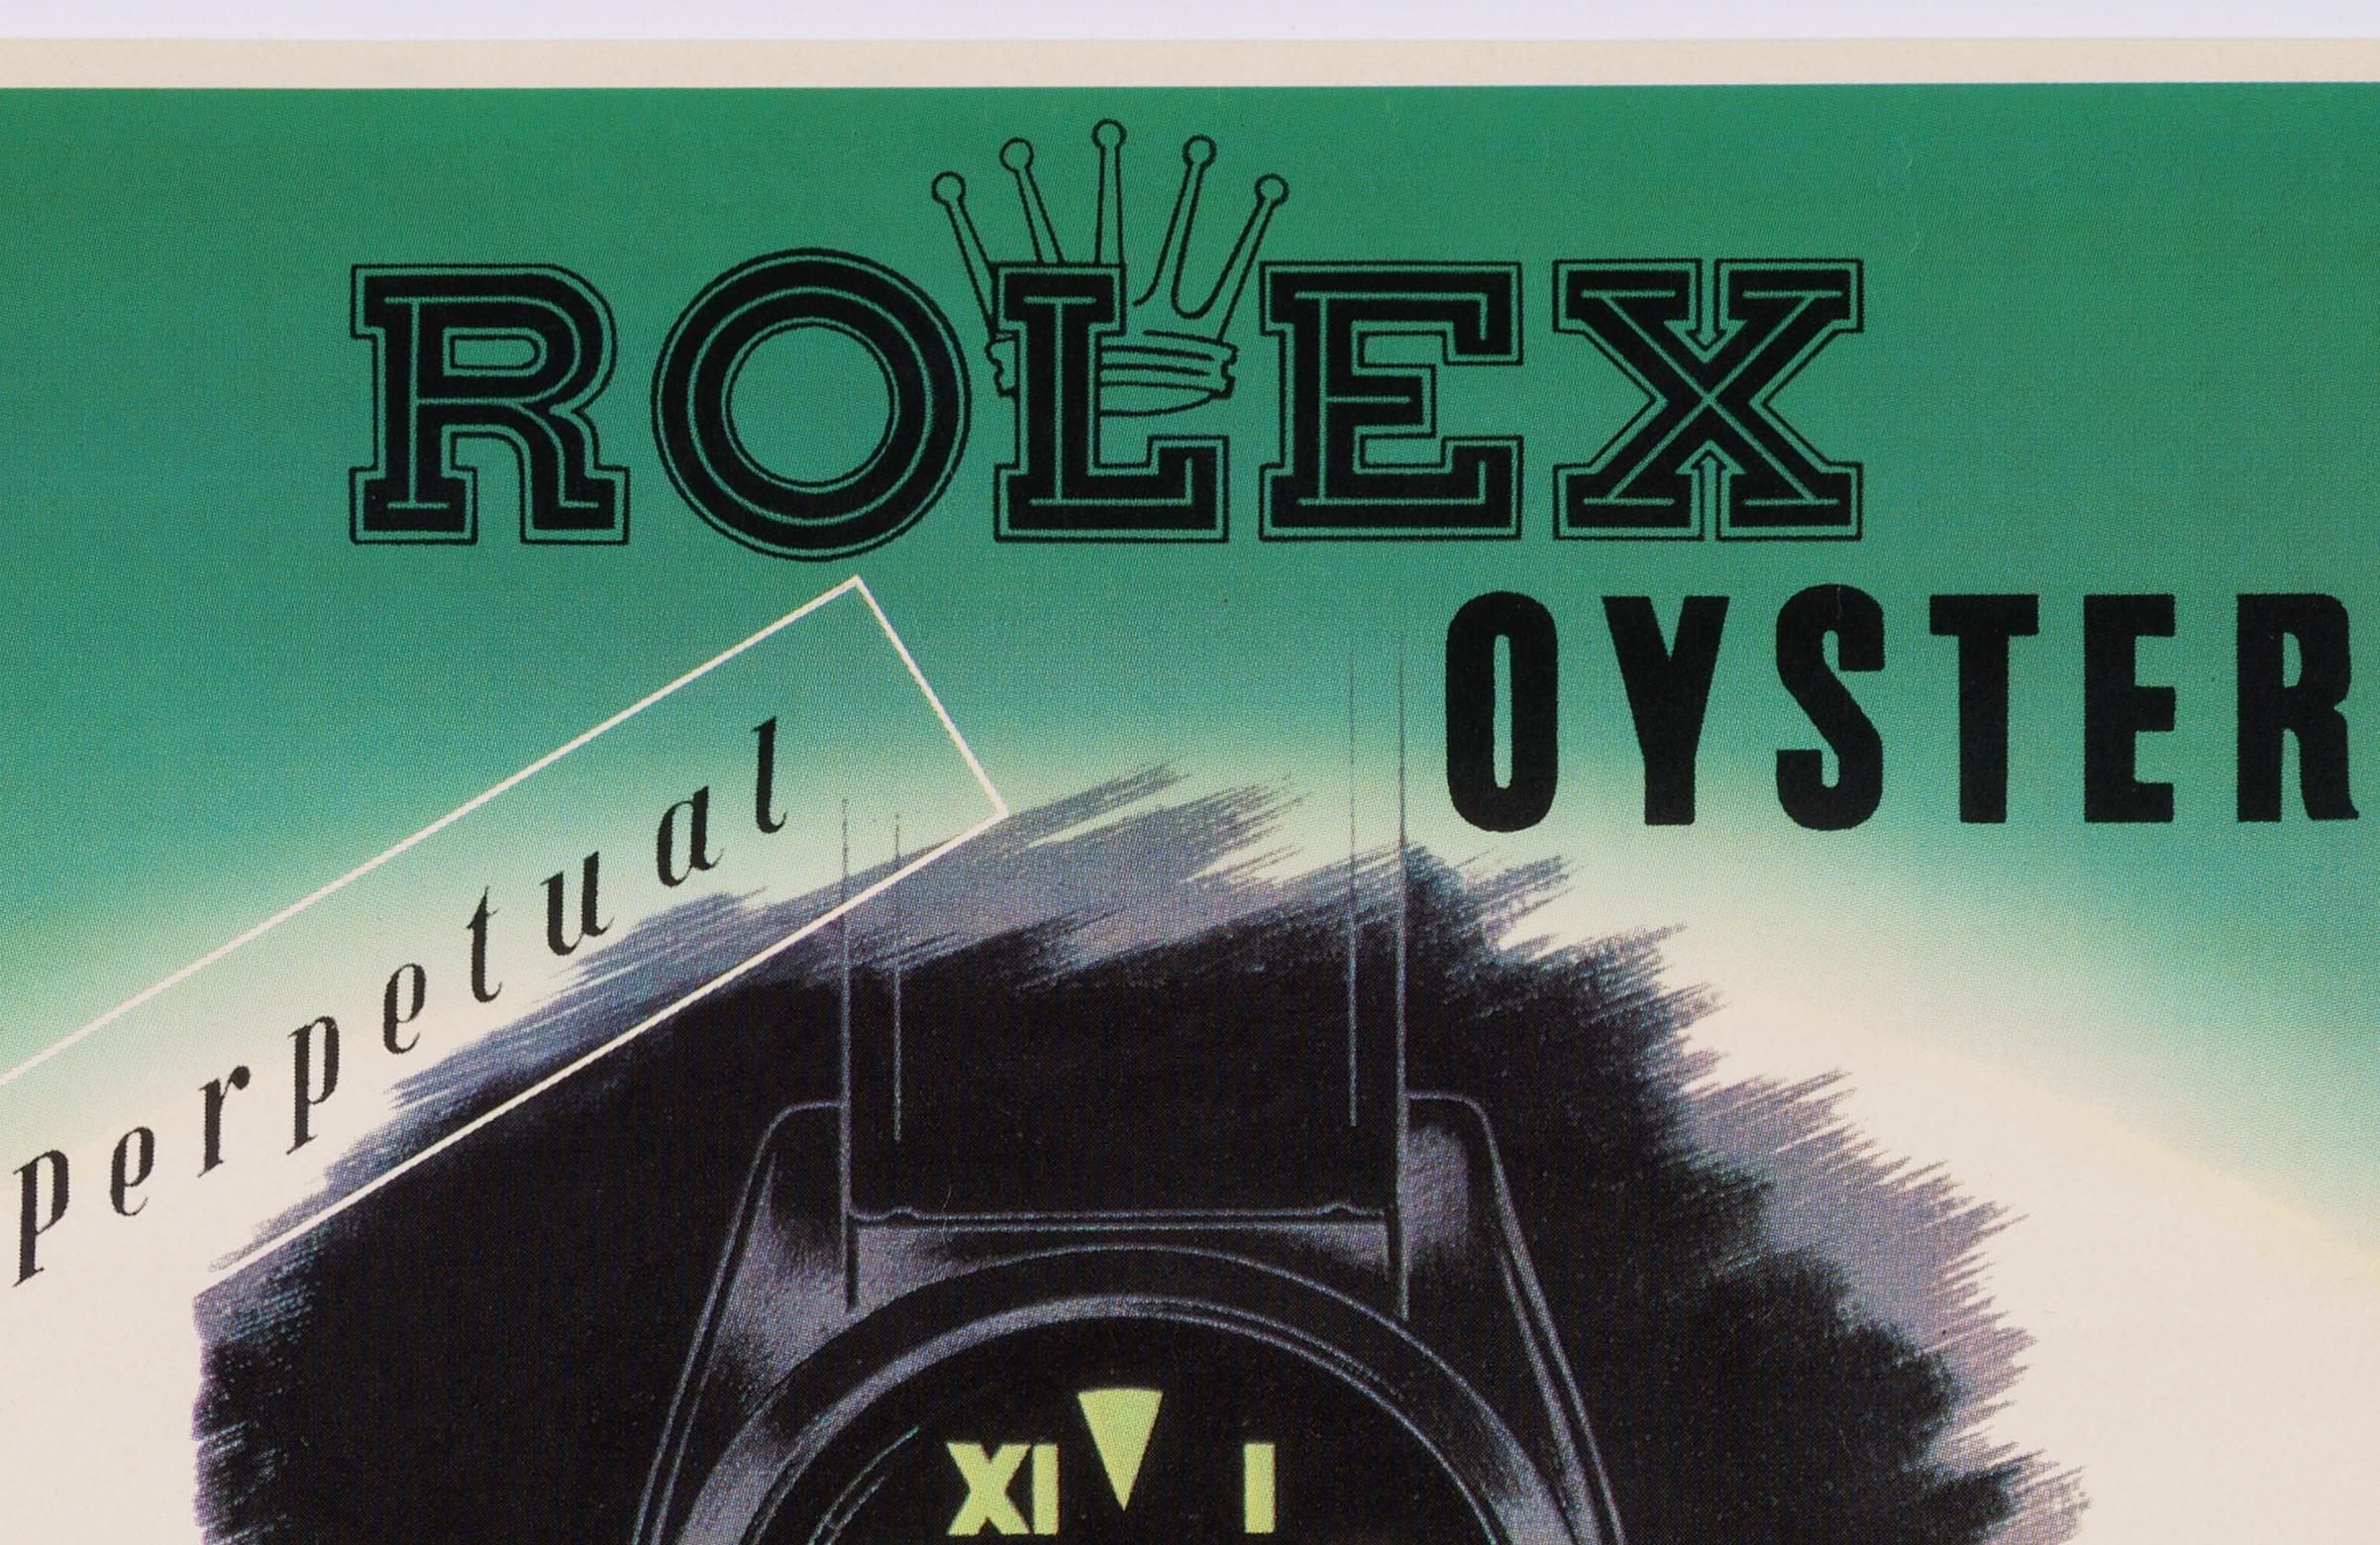 Rolex Oyster – Original Vintage Swiss Product Poster - Print by Unknown